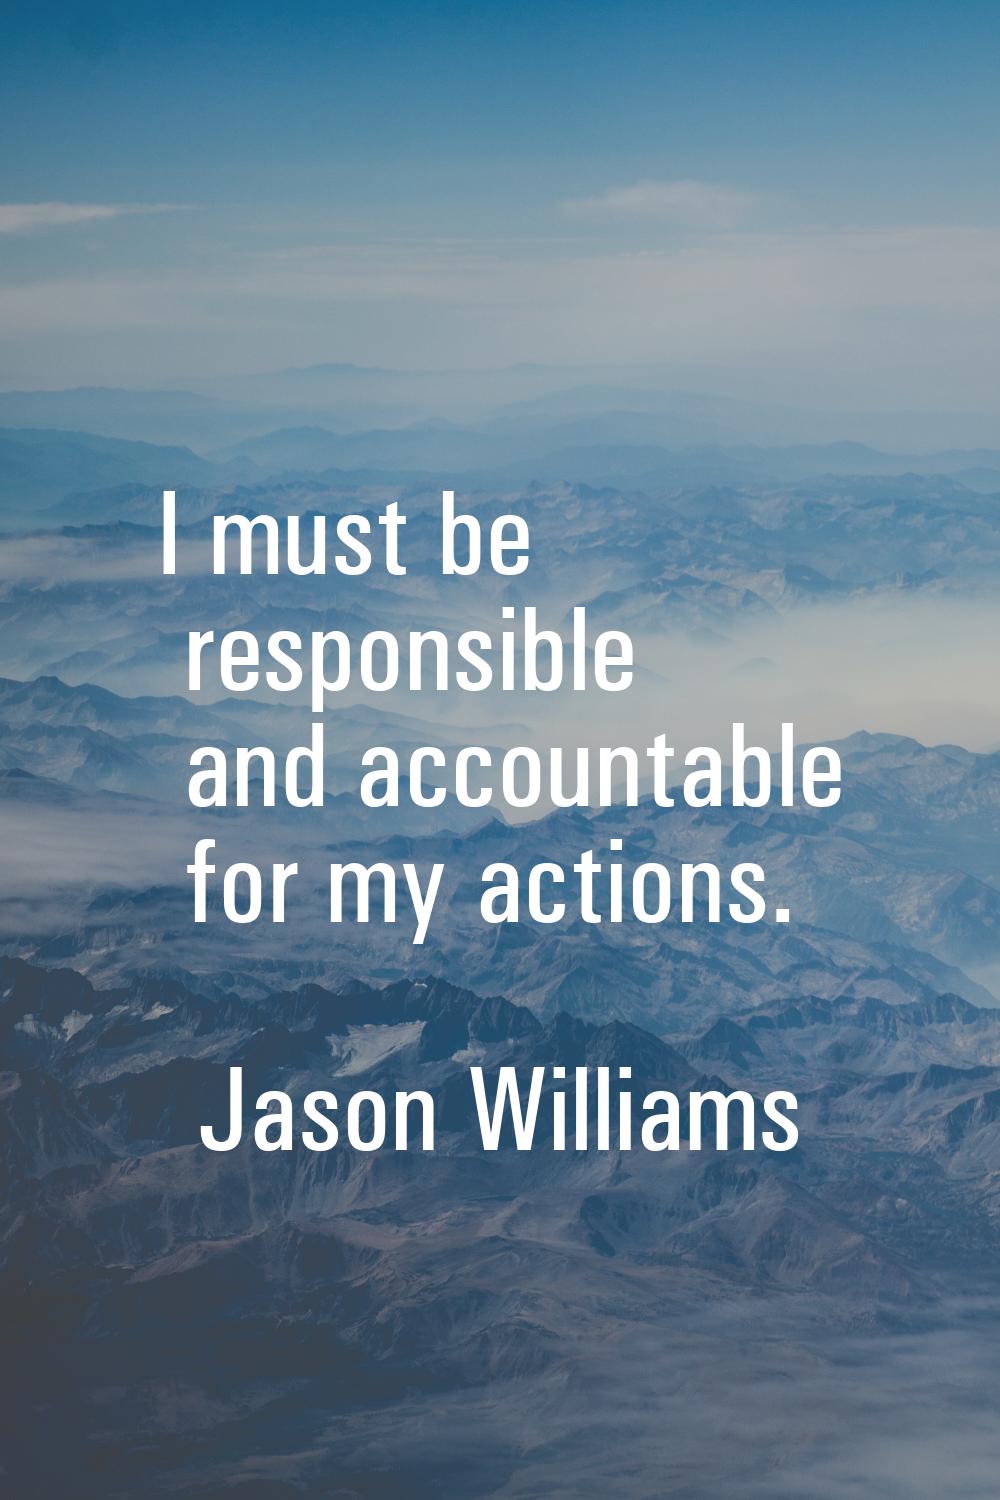 I must be responsible and accountable for my actions.